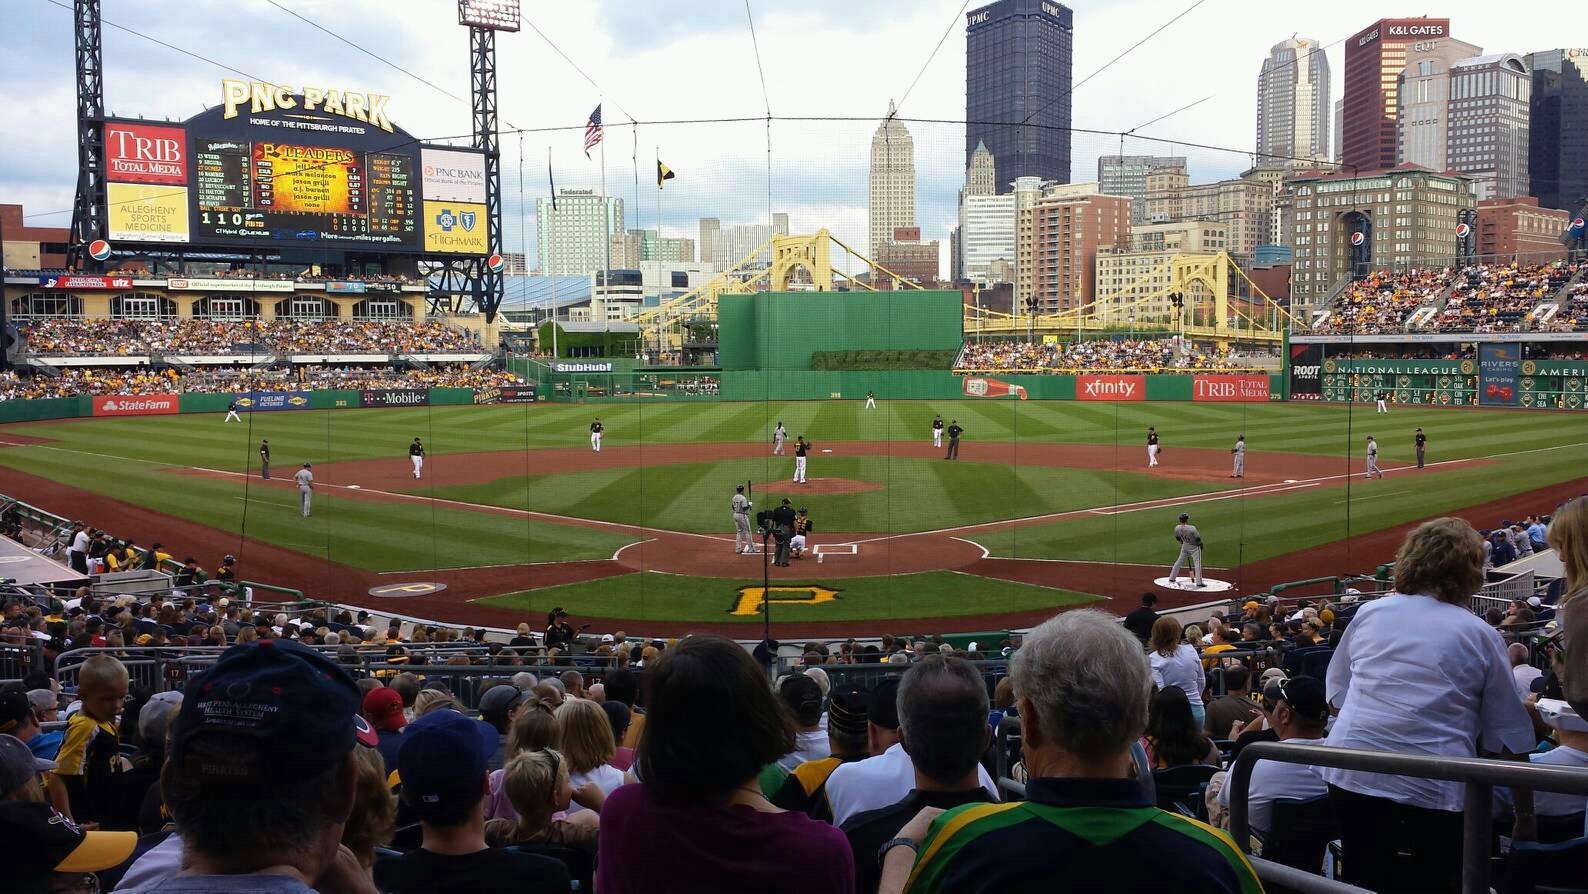 Finally made it to PNC Park and wow, the view from the seats didn